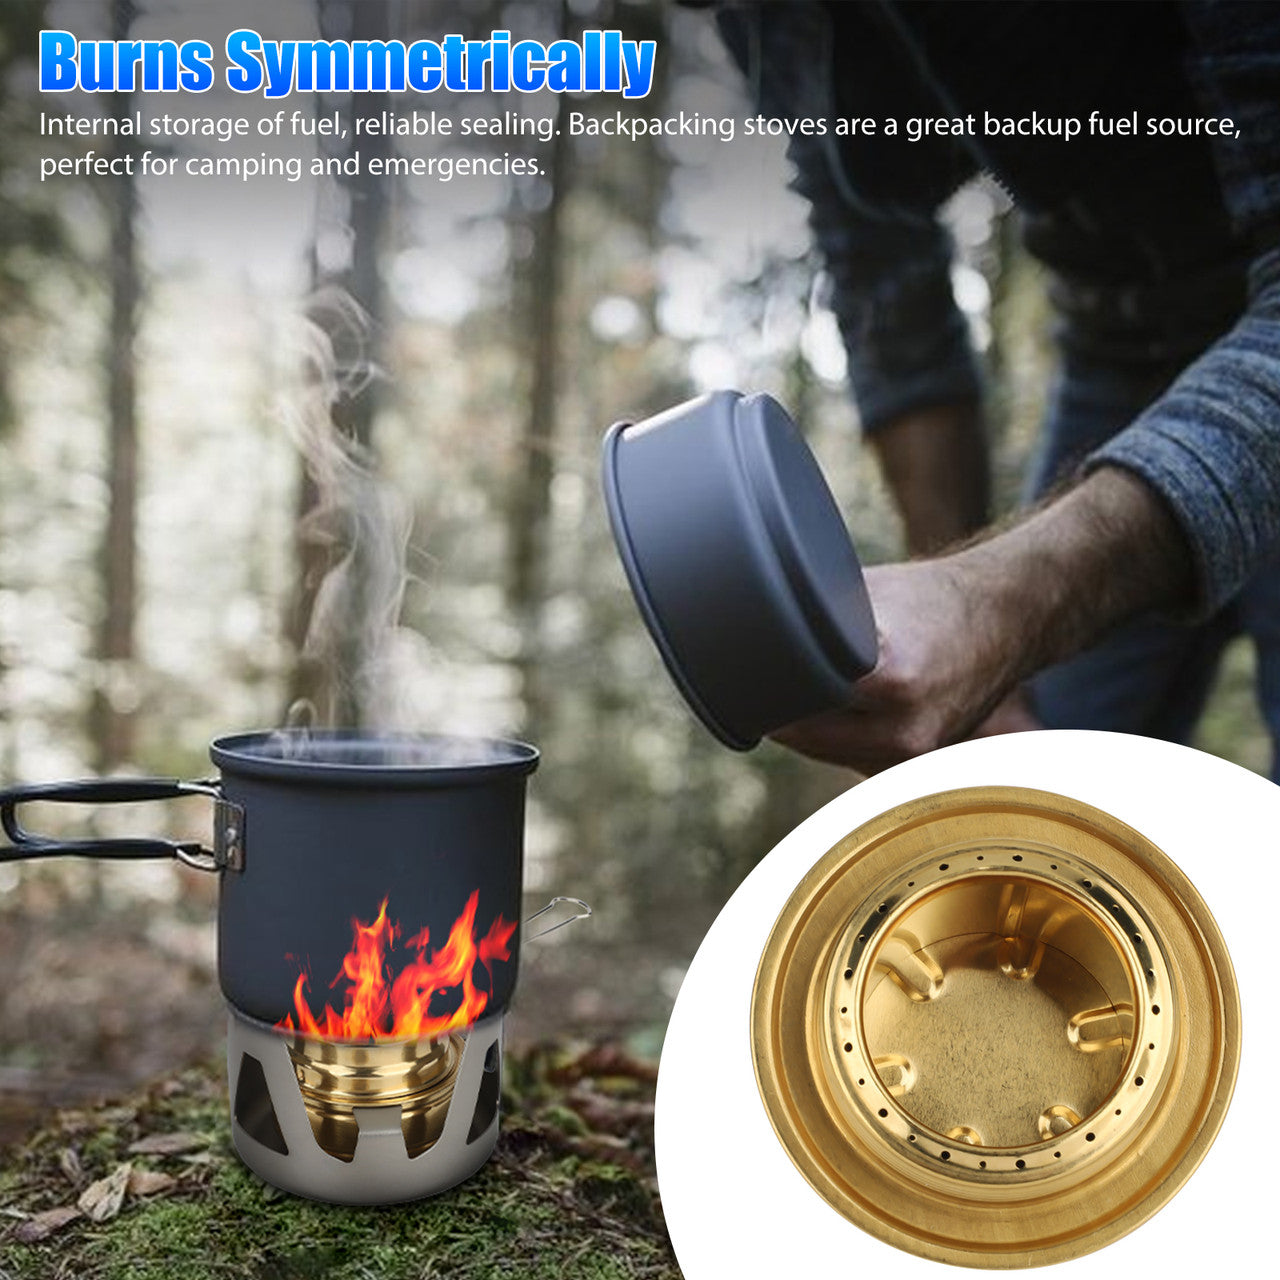 Outdoor Mini Portable Alcohol Stove Burner - Aluminum alloy stove stand and brass alcohol burner for Backpacking,Camping,Hiking